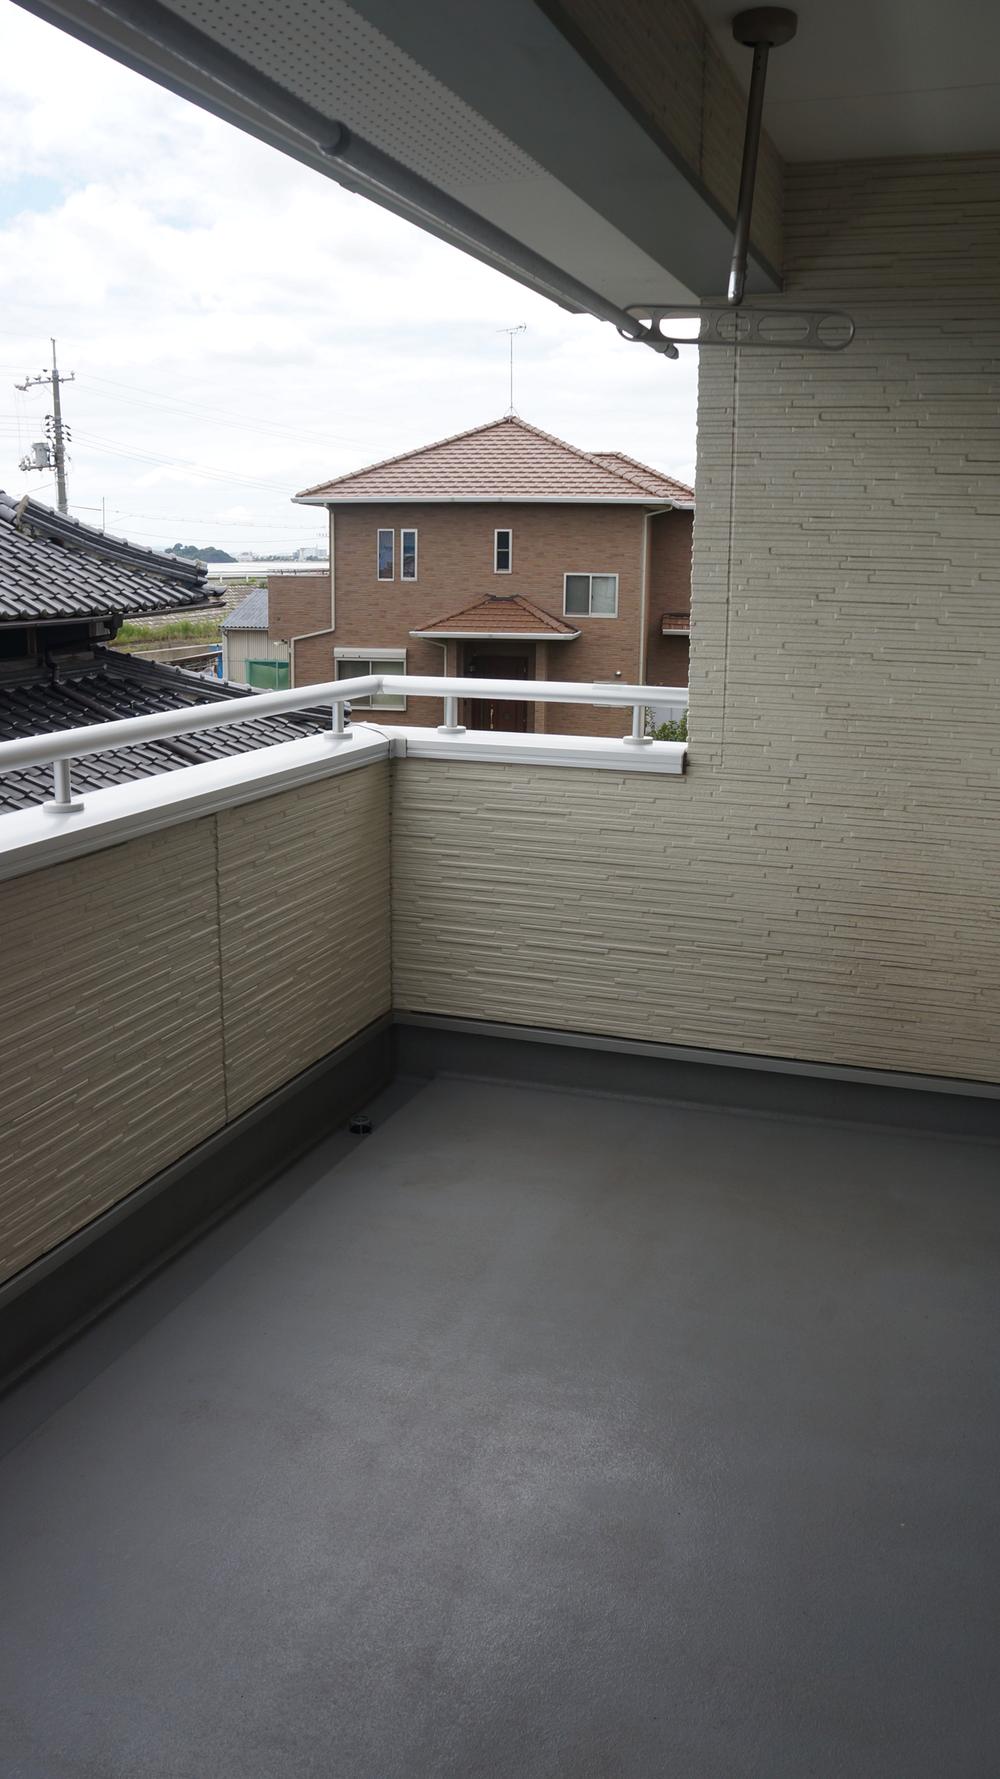 Balcony. Depth ・ Spacious balcony with a space in width both